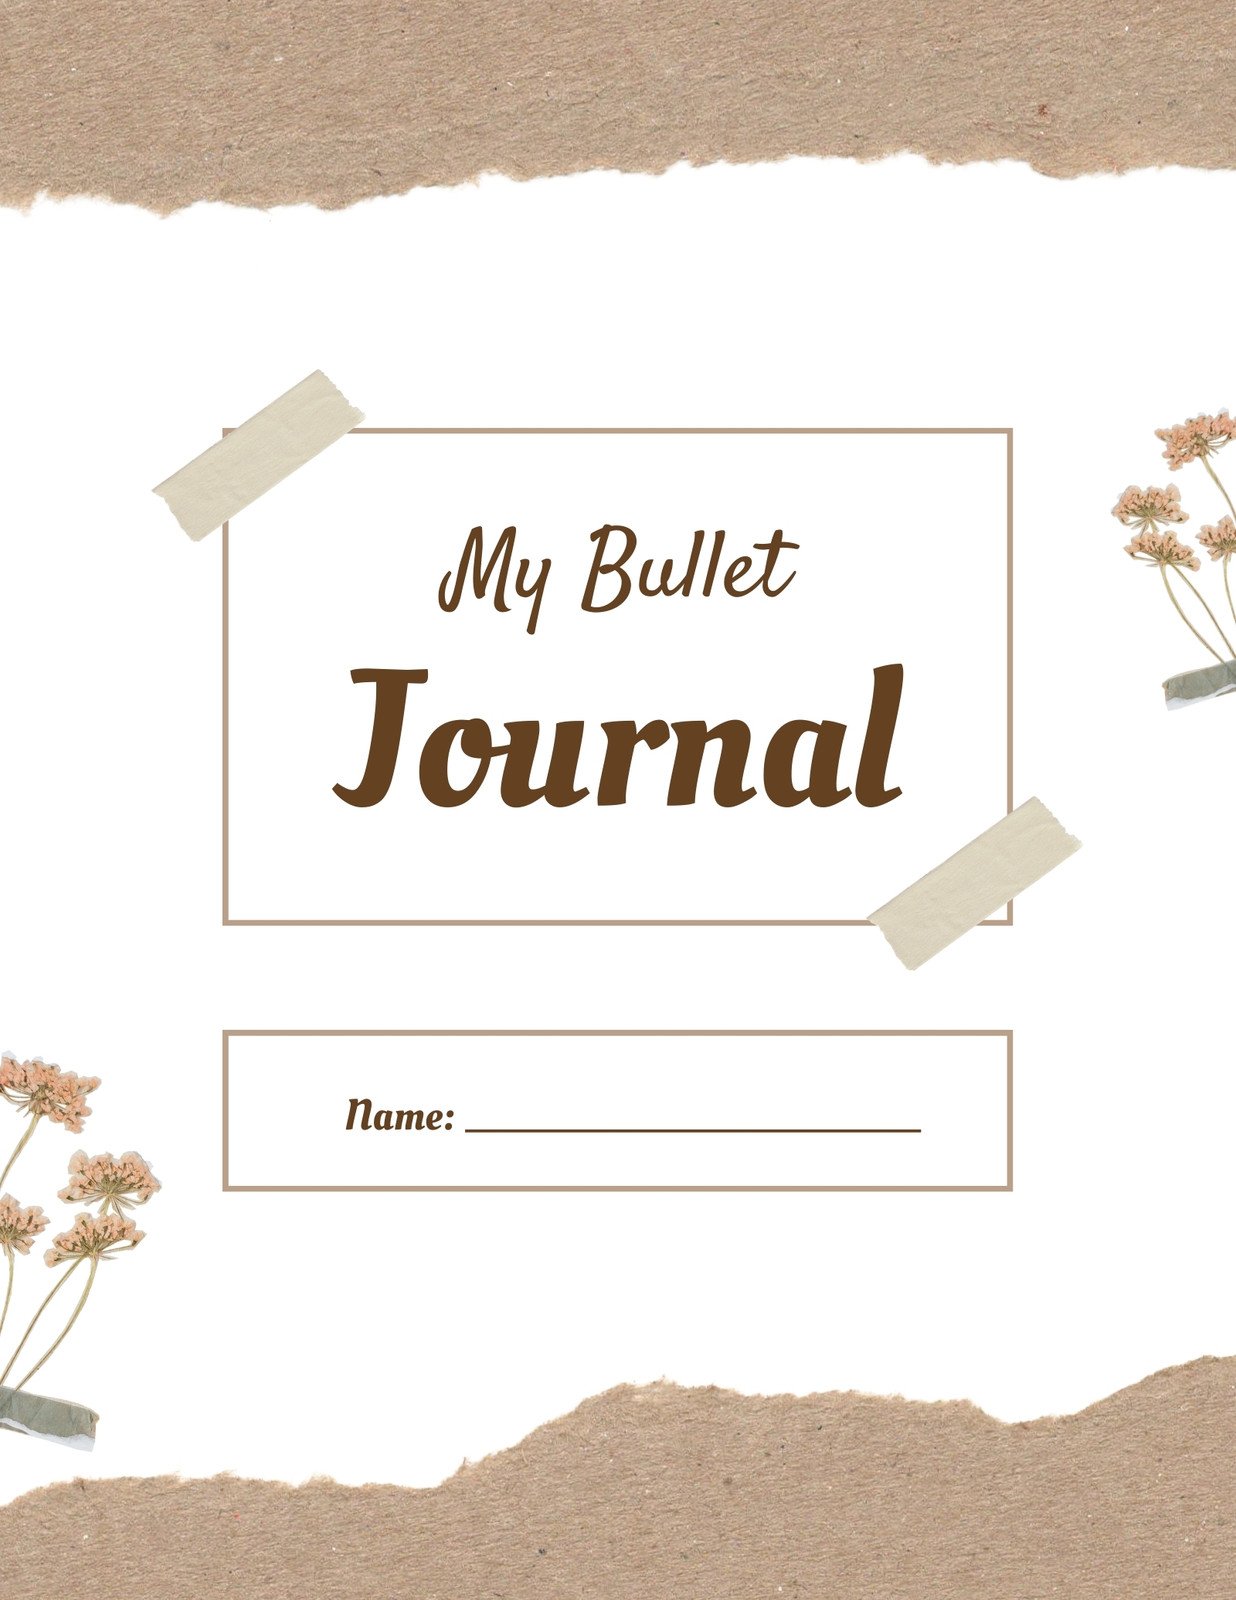 10 Creative Bullet Journal Title Designs to Organize Your Life